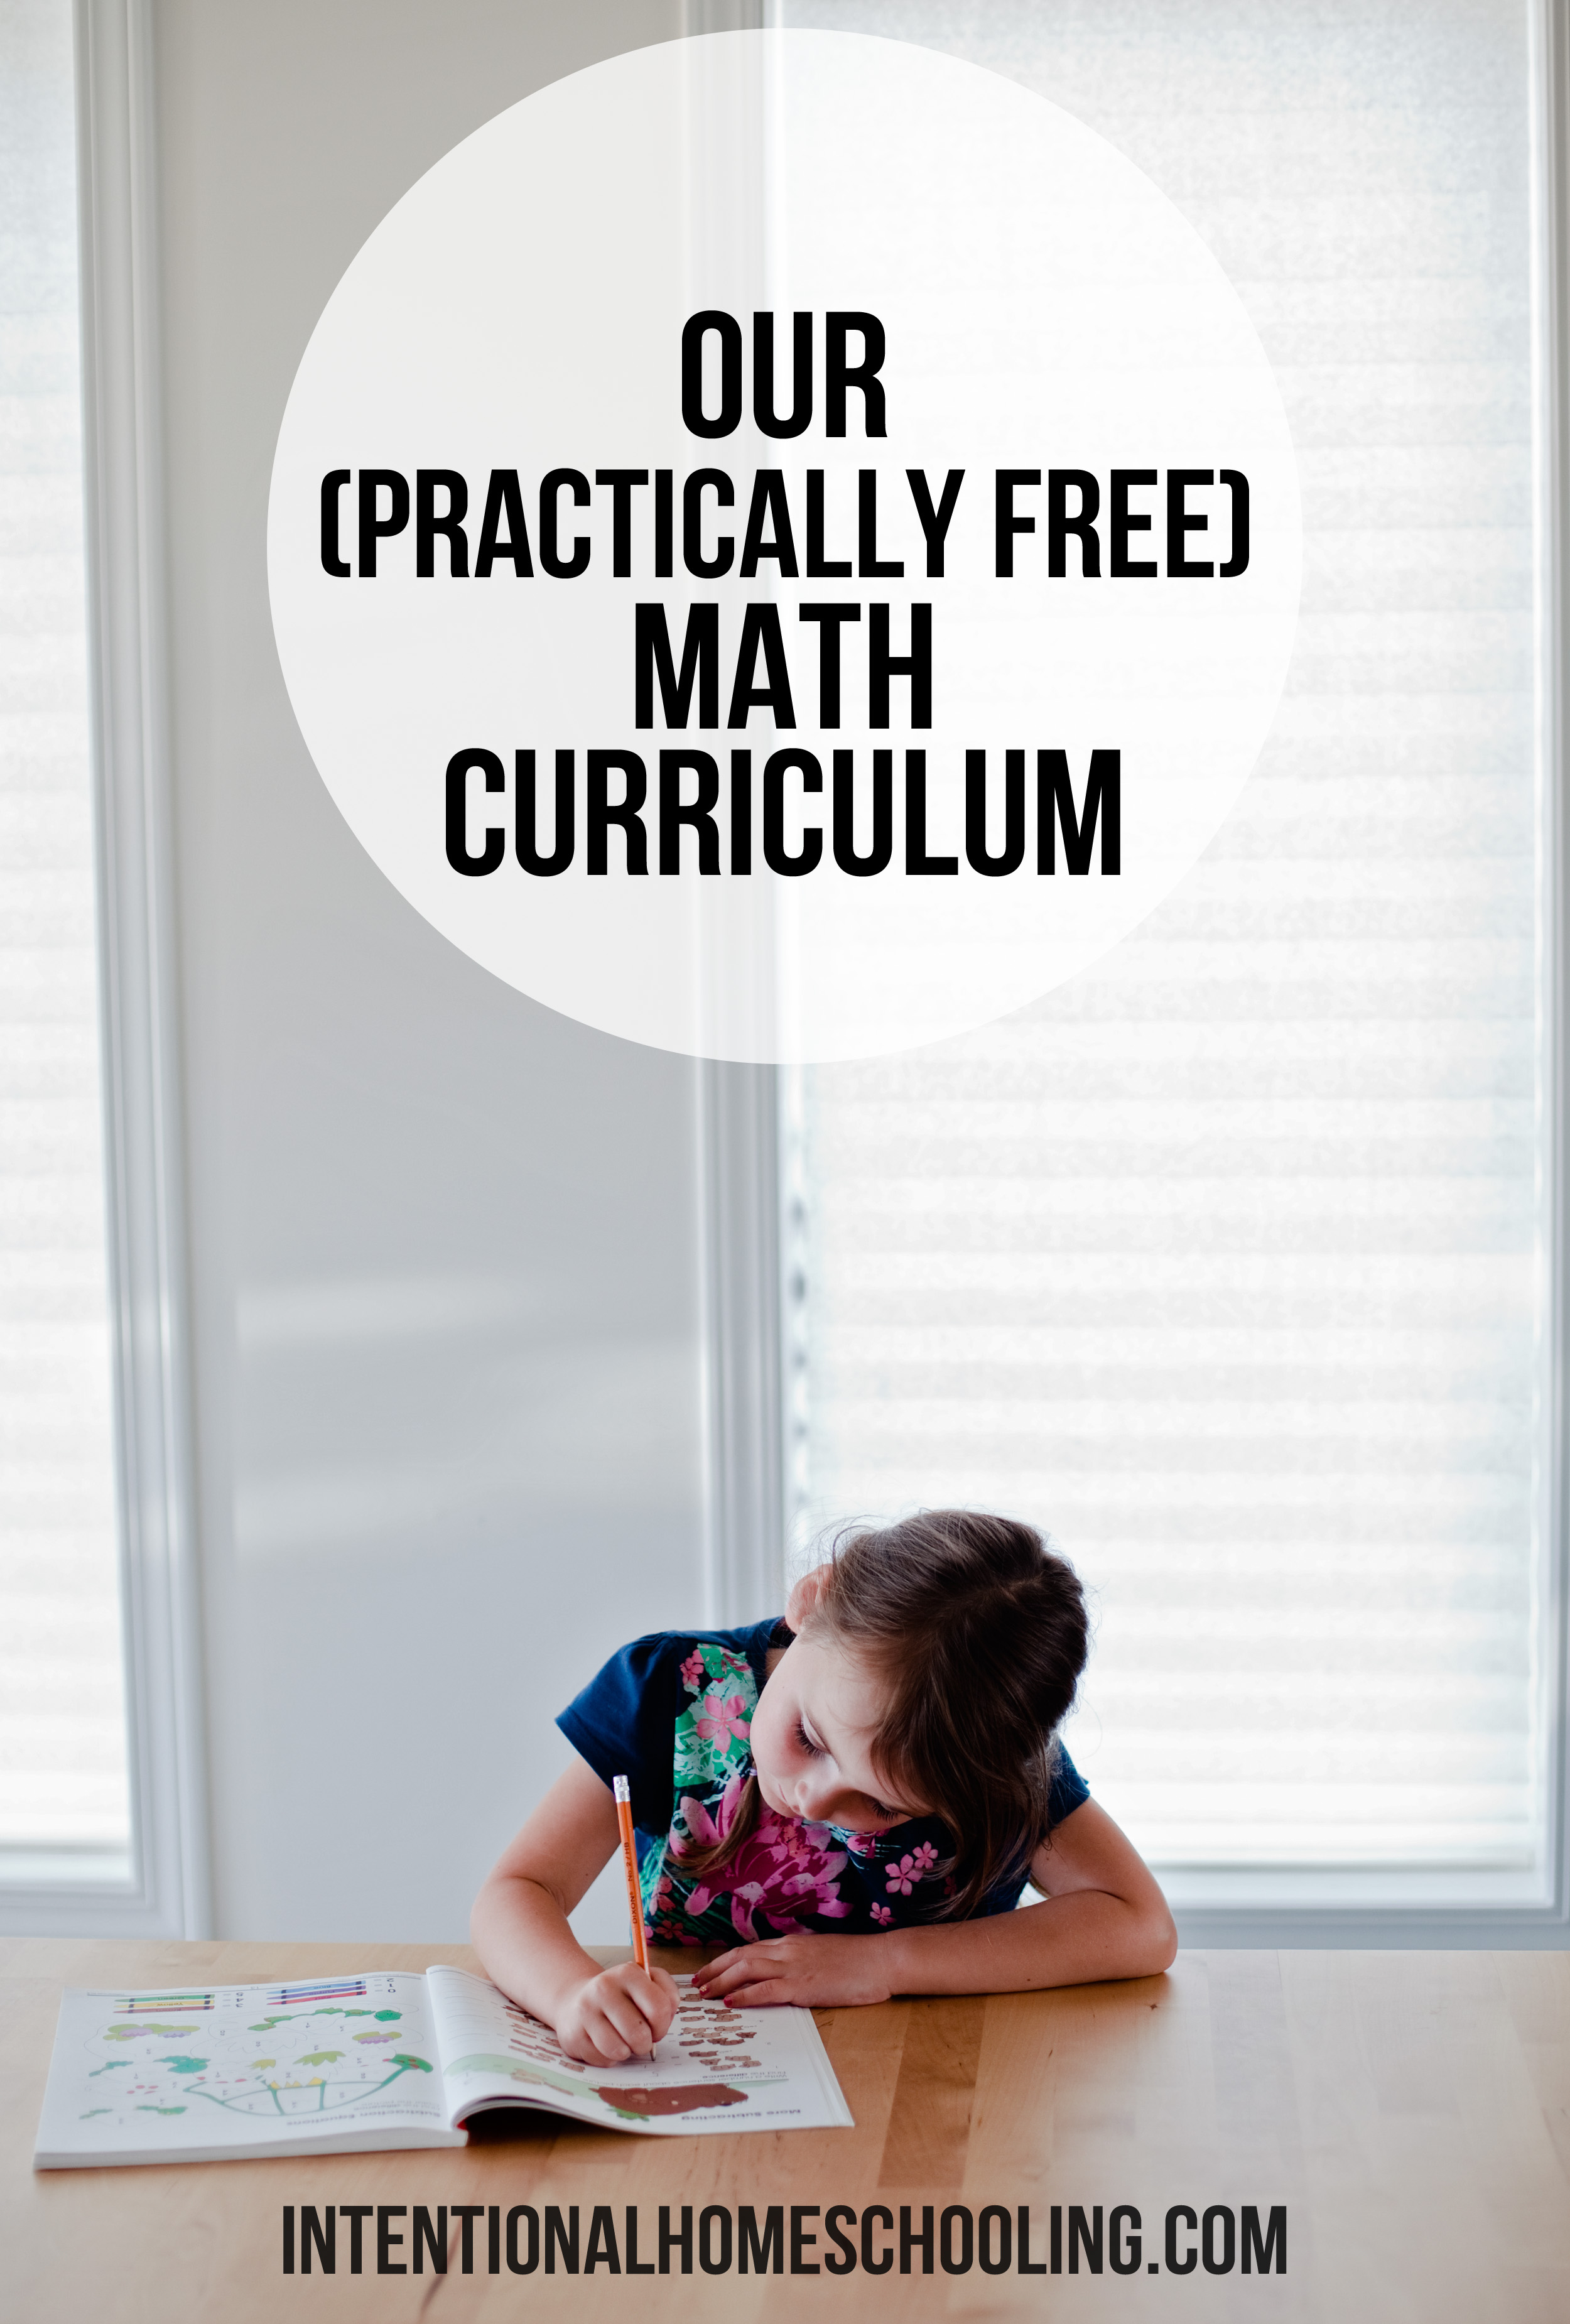 A break down on our practically free ($3) math curriculum for grade 1 math (but easy to adapt to all grades).